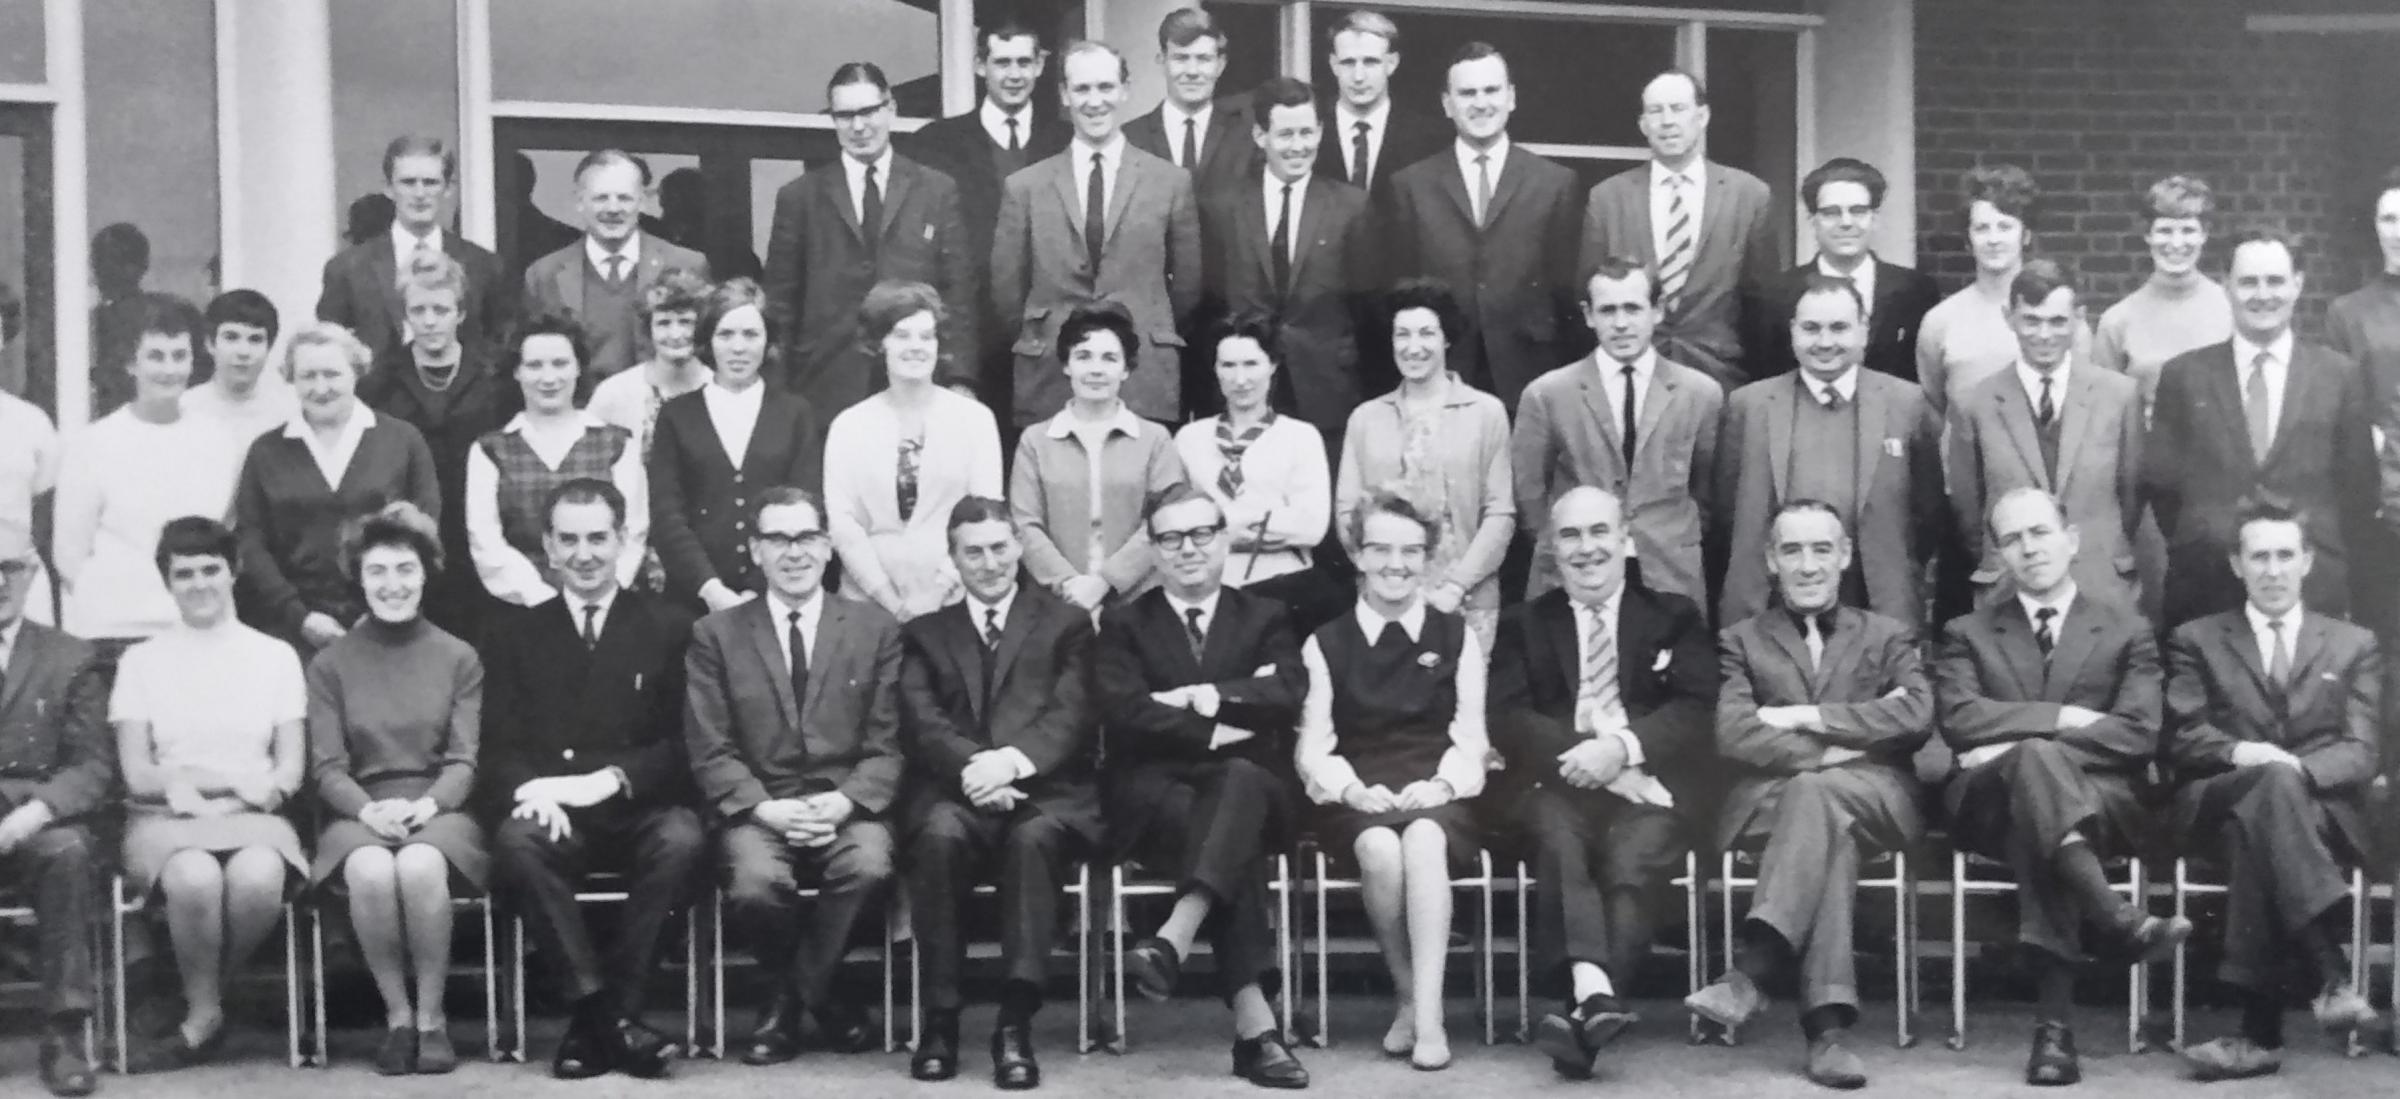 Nunnerys teaching line-up in 1967. Do you remember any of the faces?